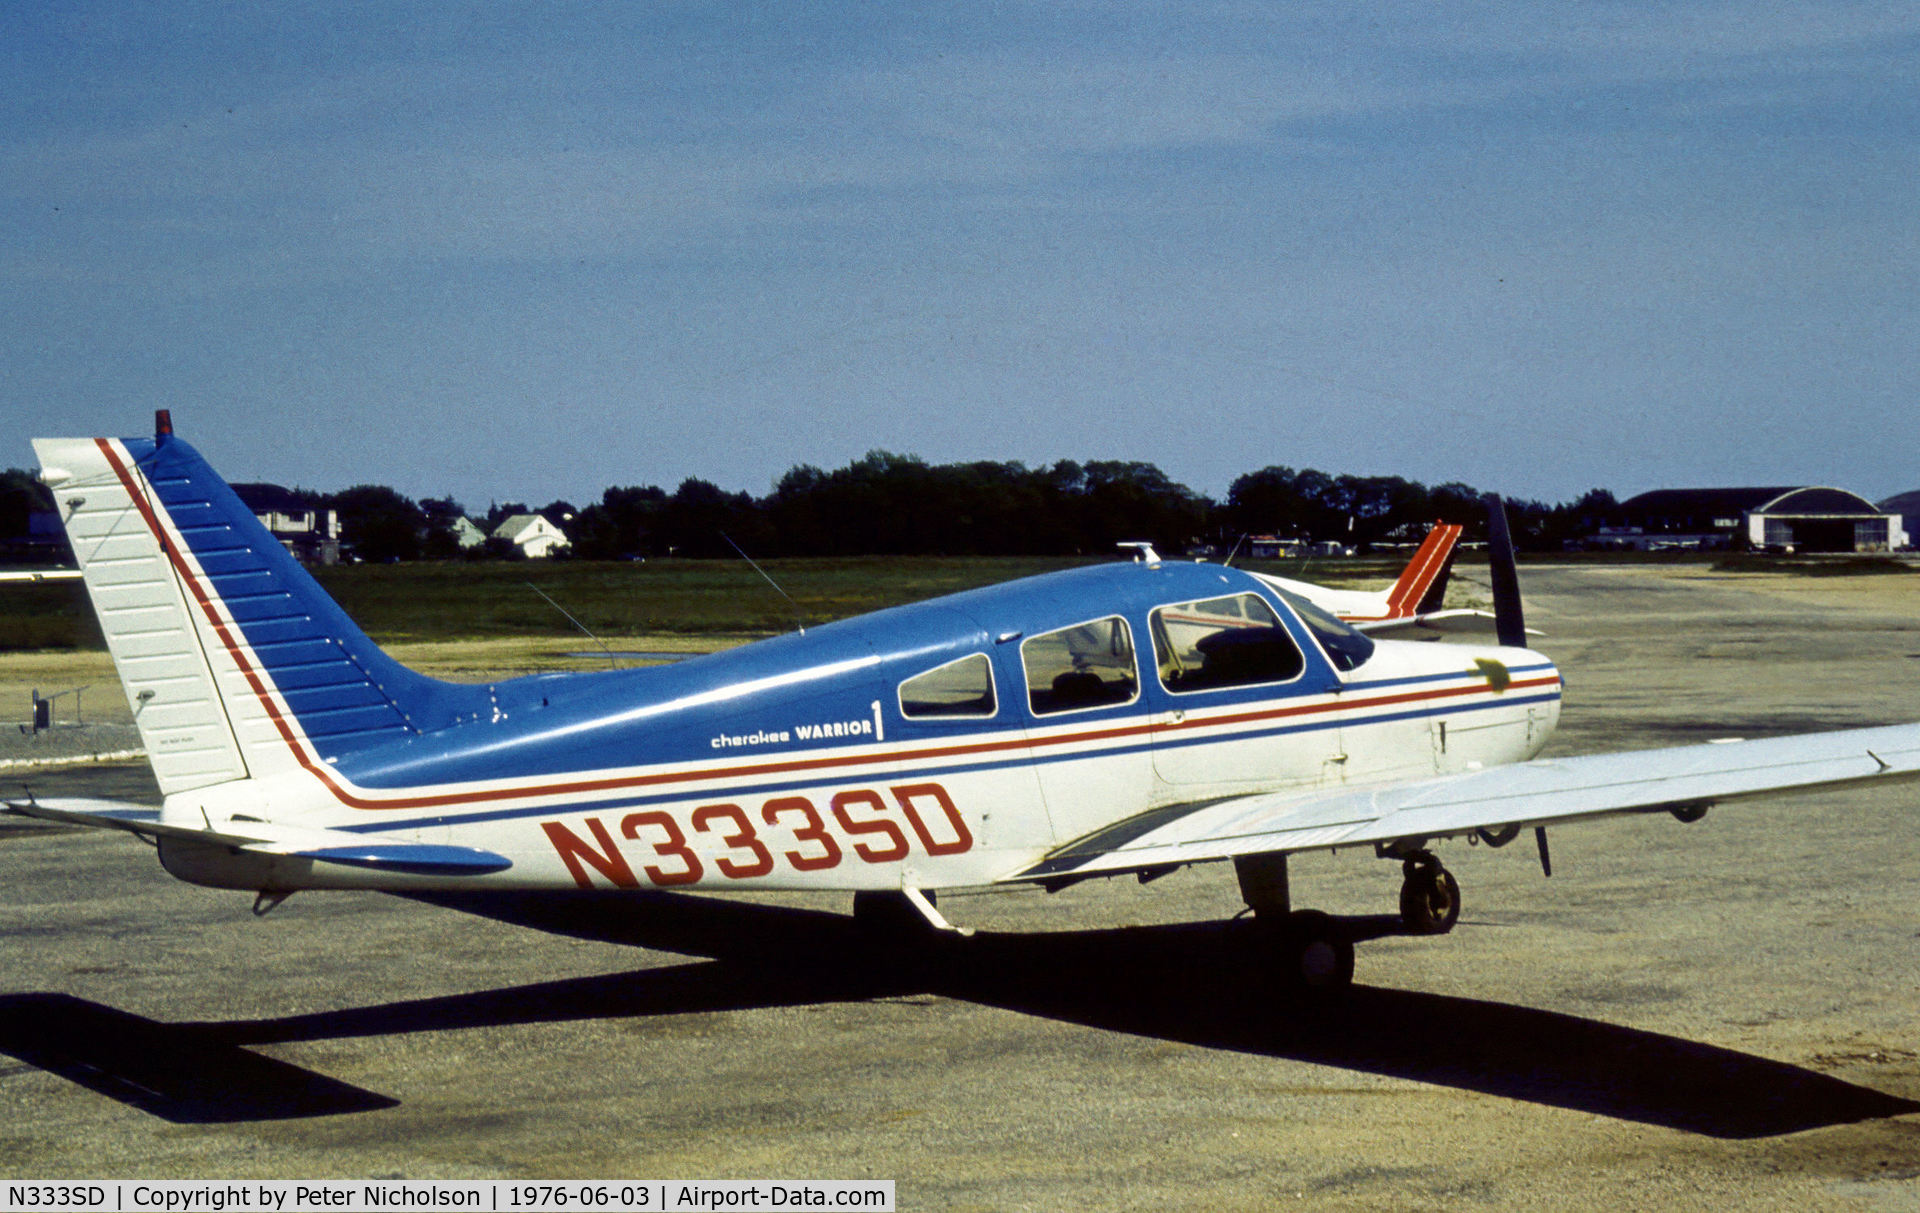 N333SD, Piper PA-28-151 Cherokee Warrior C/N not known, PA-28-151 Cherokee Warrior seen at Zahns Airfield on Long Island in the Summer of 1976.  The airport closed in 1980.